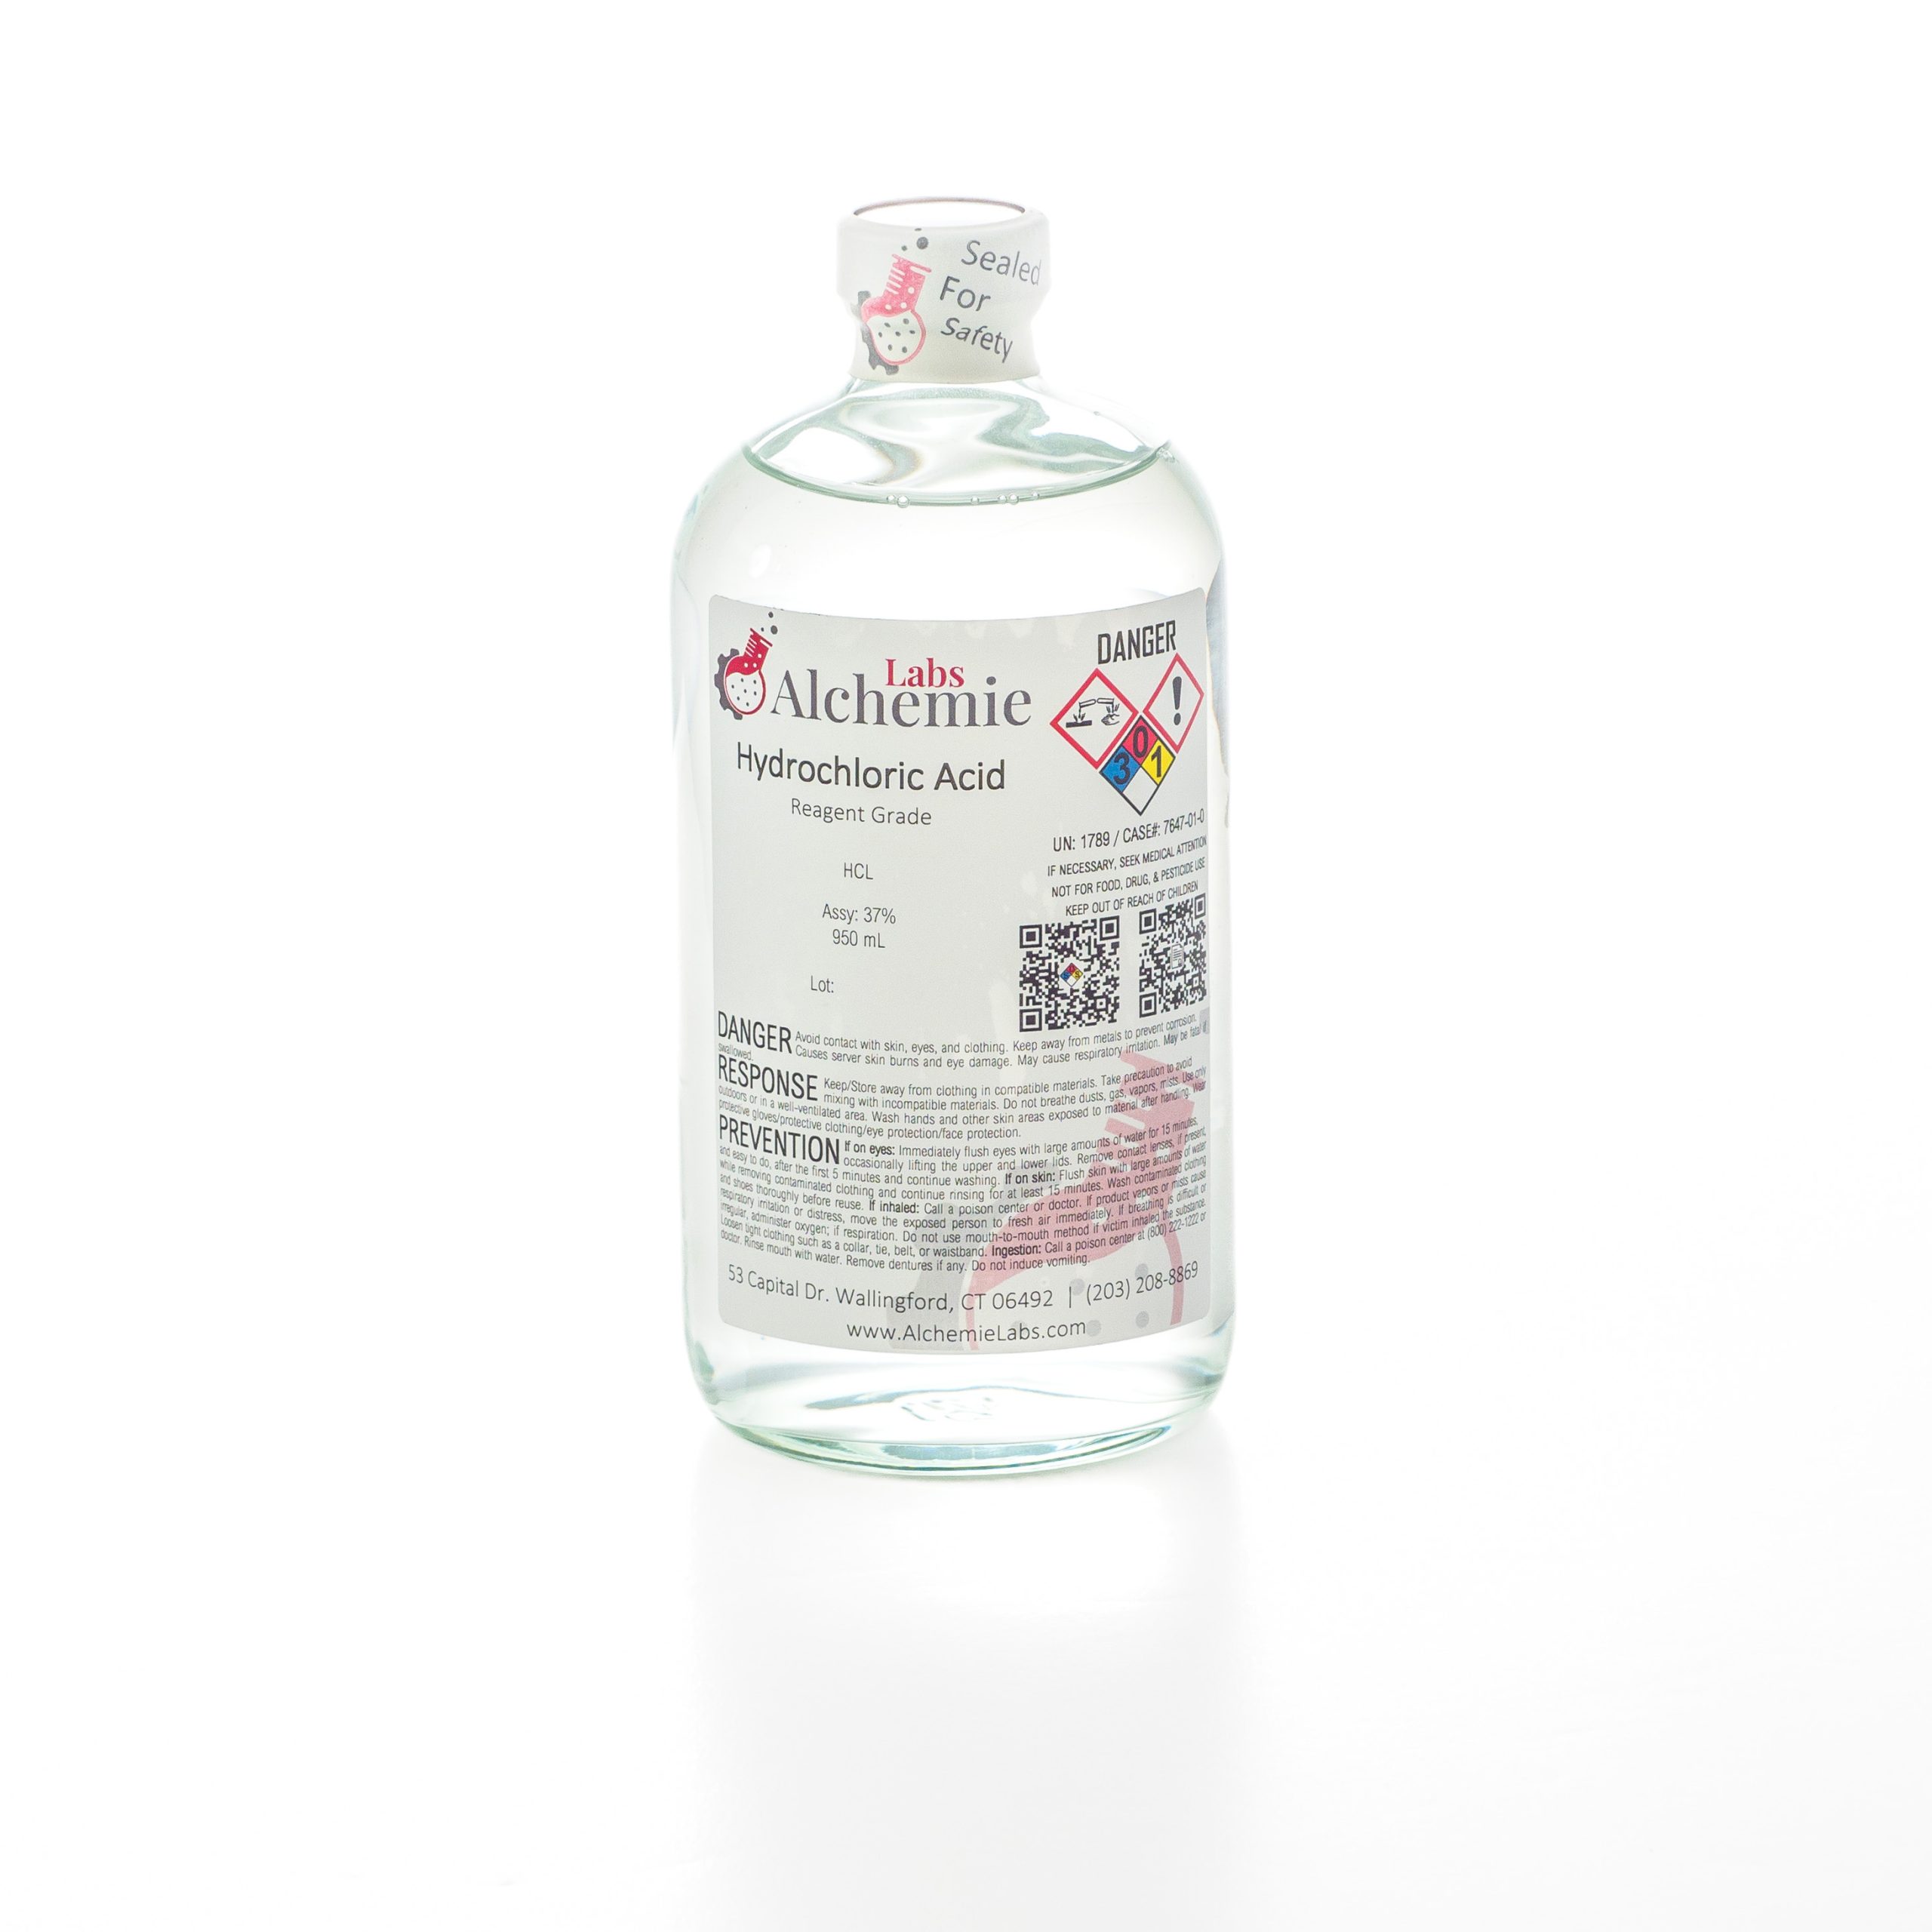 A 950mL clear glass bottle of Alchemie Labs hydrochloric acid, reagent grade, with safety seal and comprehensive labeling.